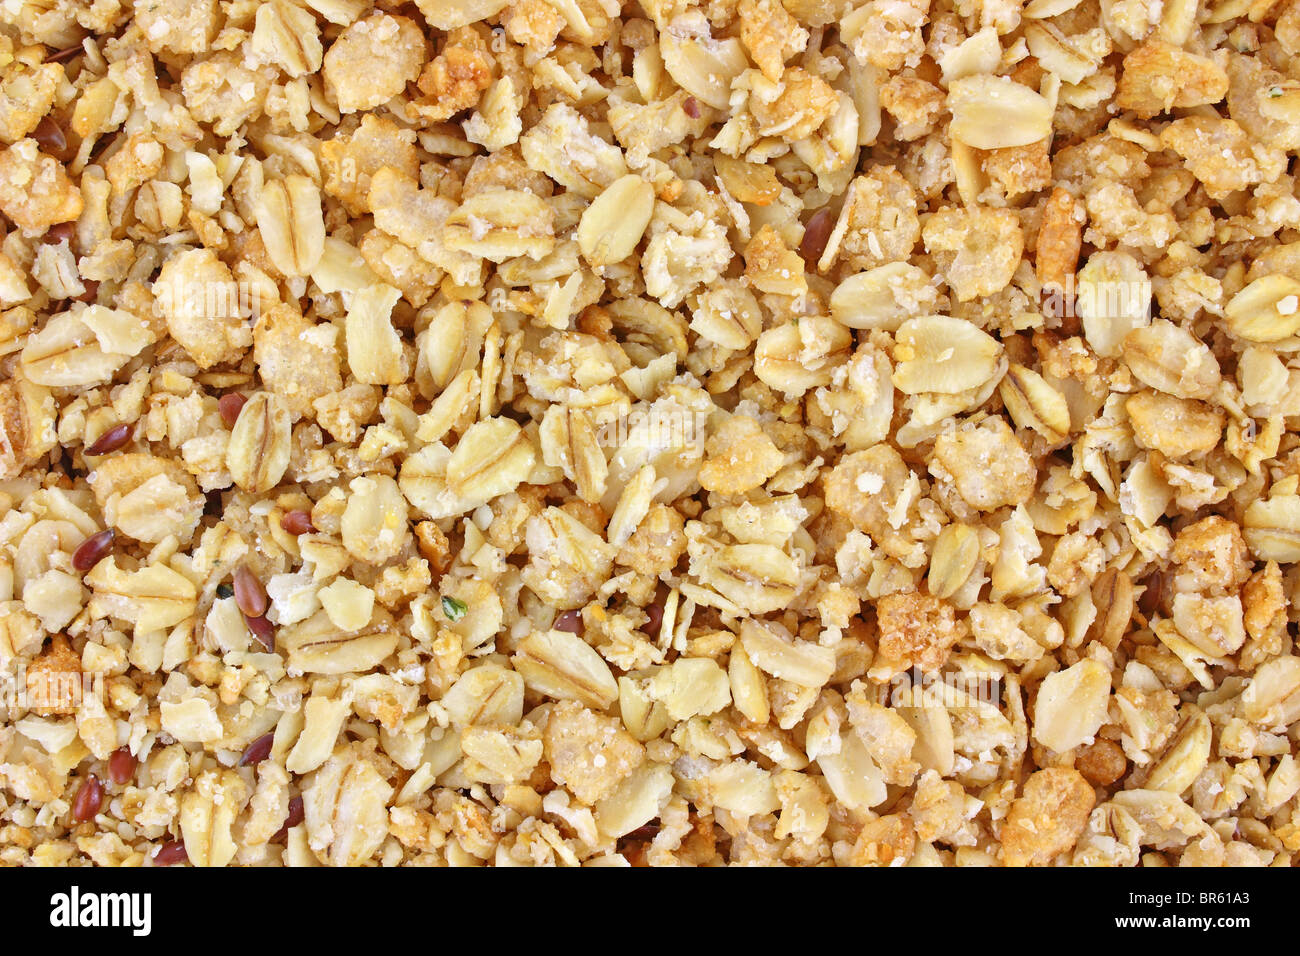 Close view of granola cereal Stock Photo